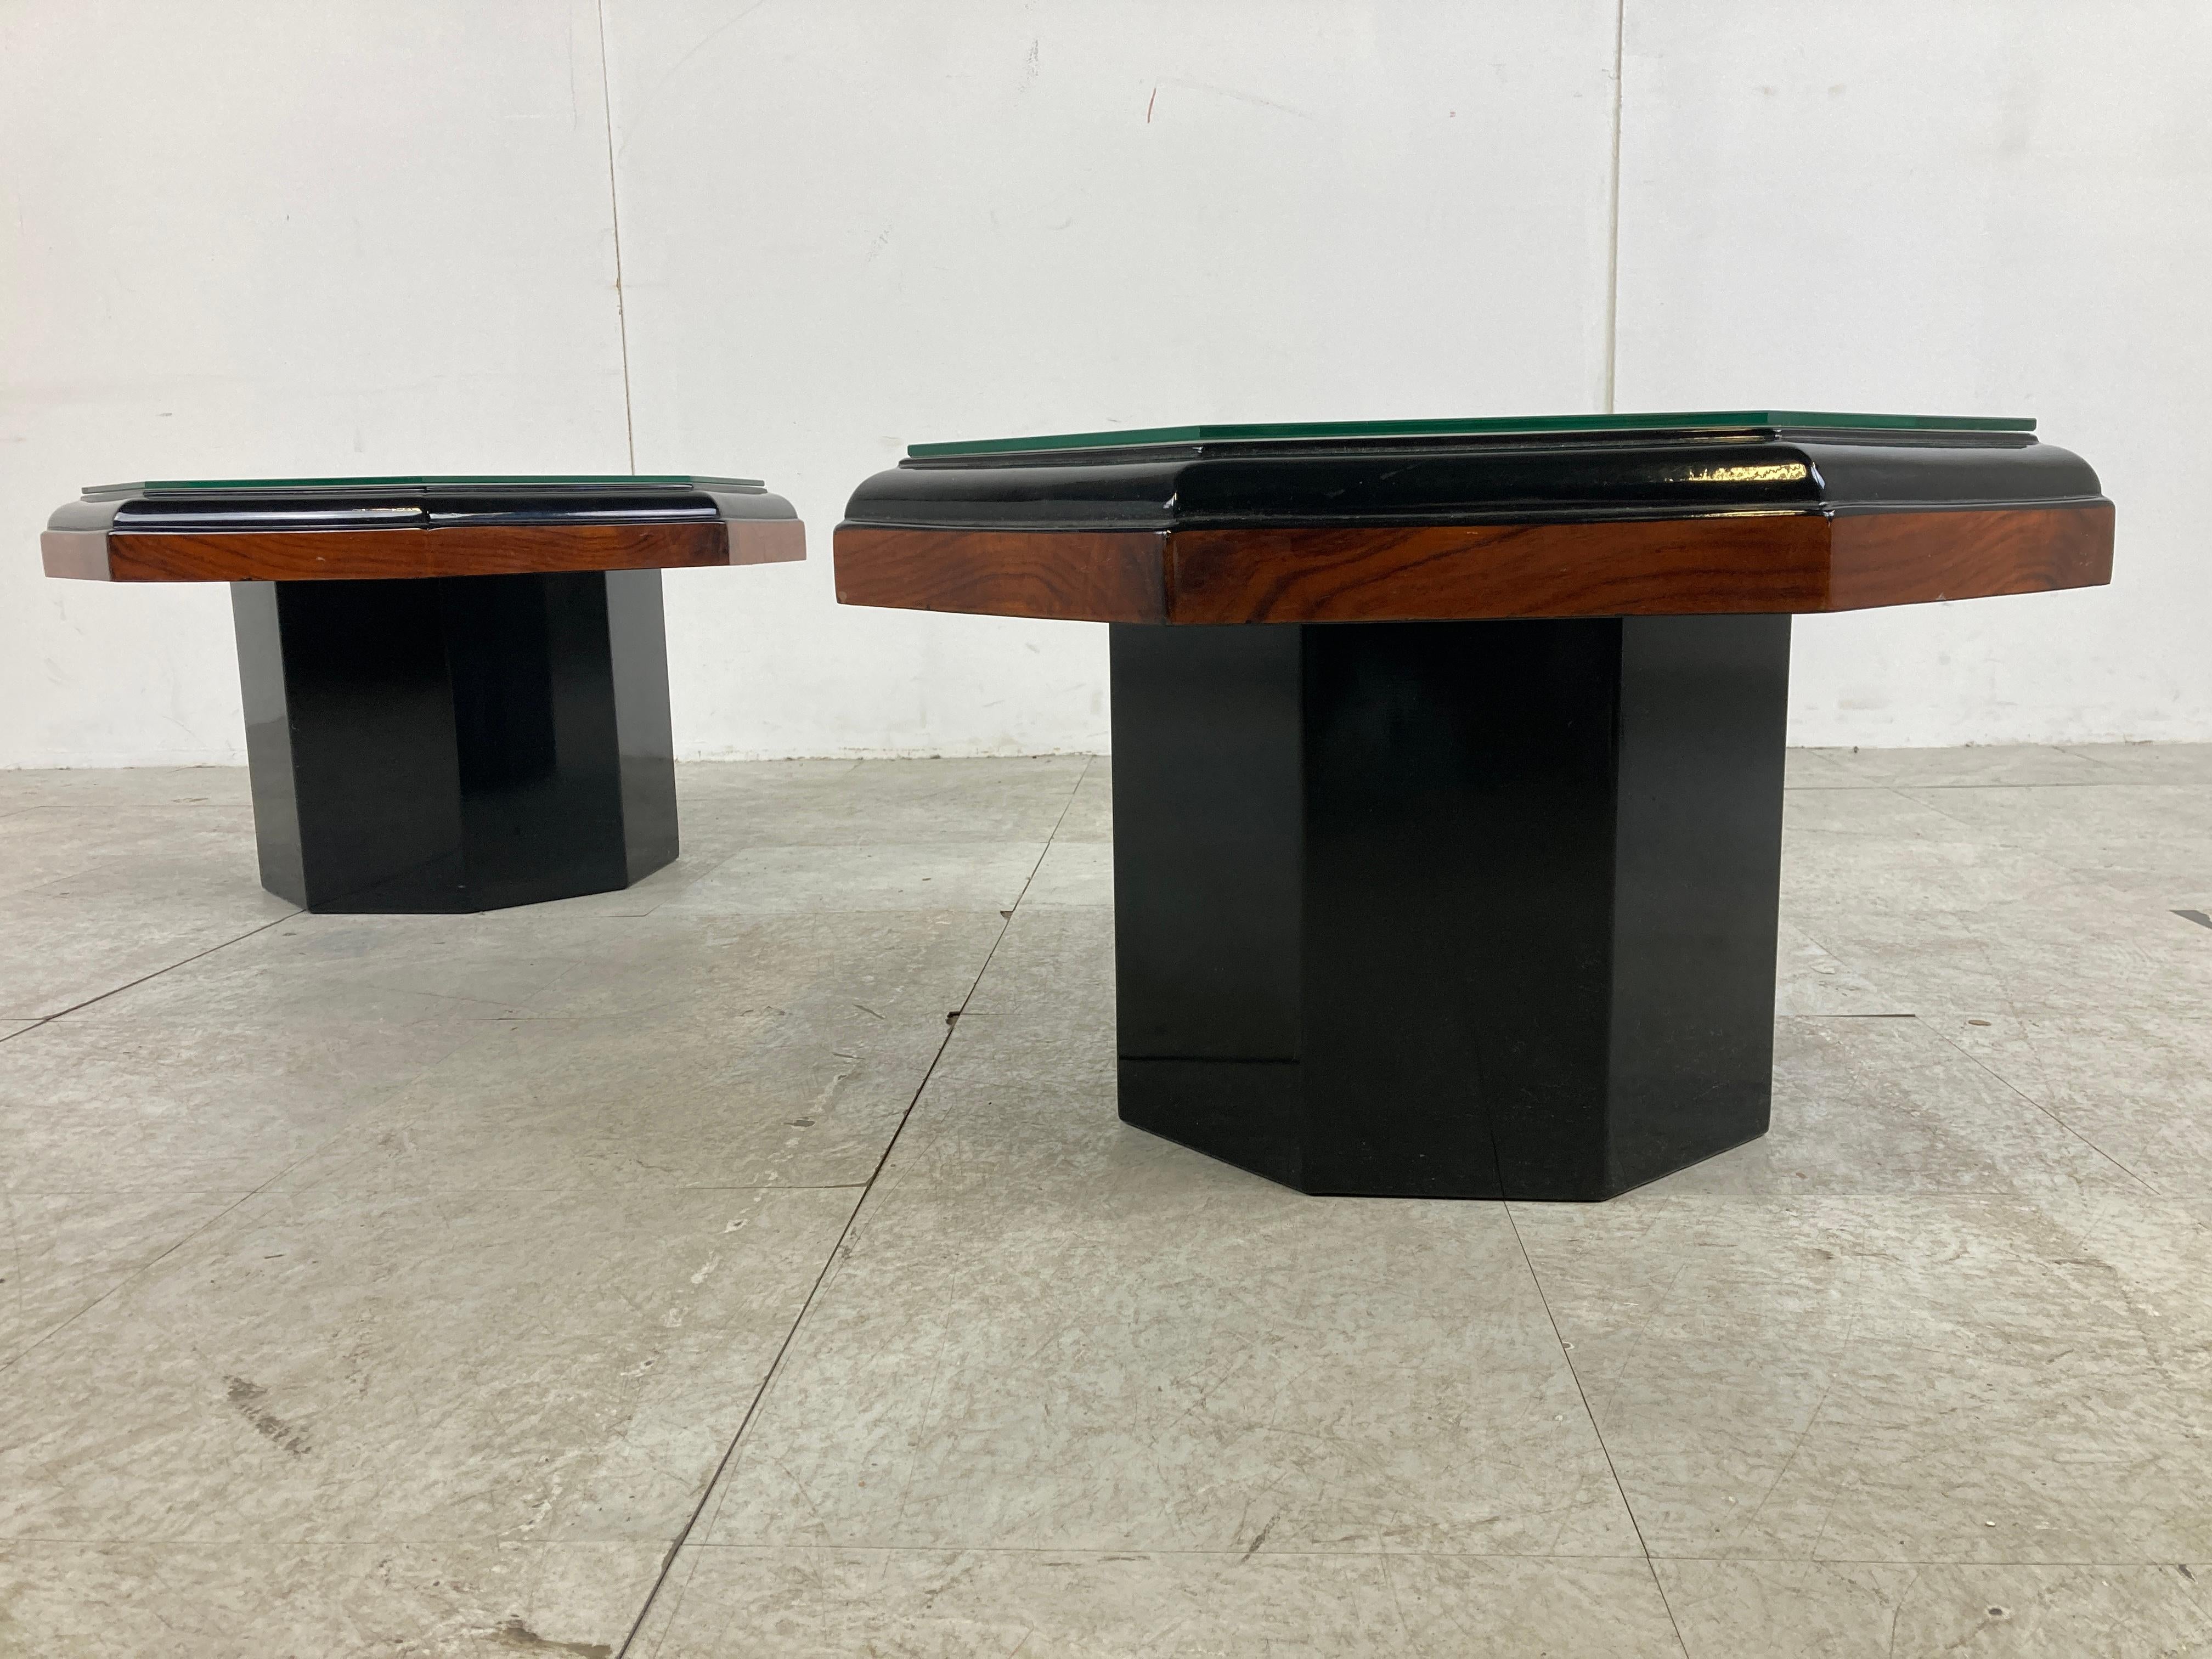 Elegant octogonal burl wood and lacquer side tables or coffee tables.

Very lovely seventies/eighties glam look thanks to the burl veneer.

The tables have glass tops to protect the burl wood. 

Very good condition

Very much in the style of